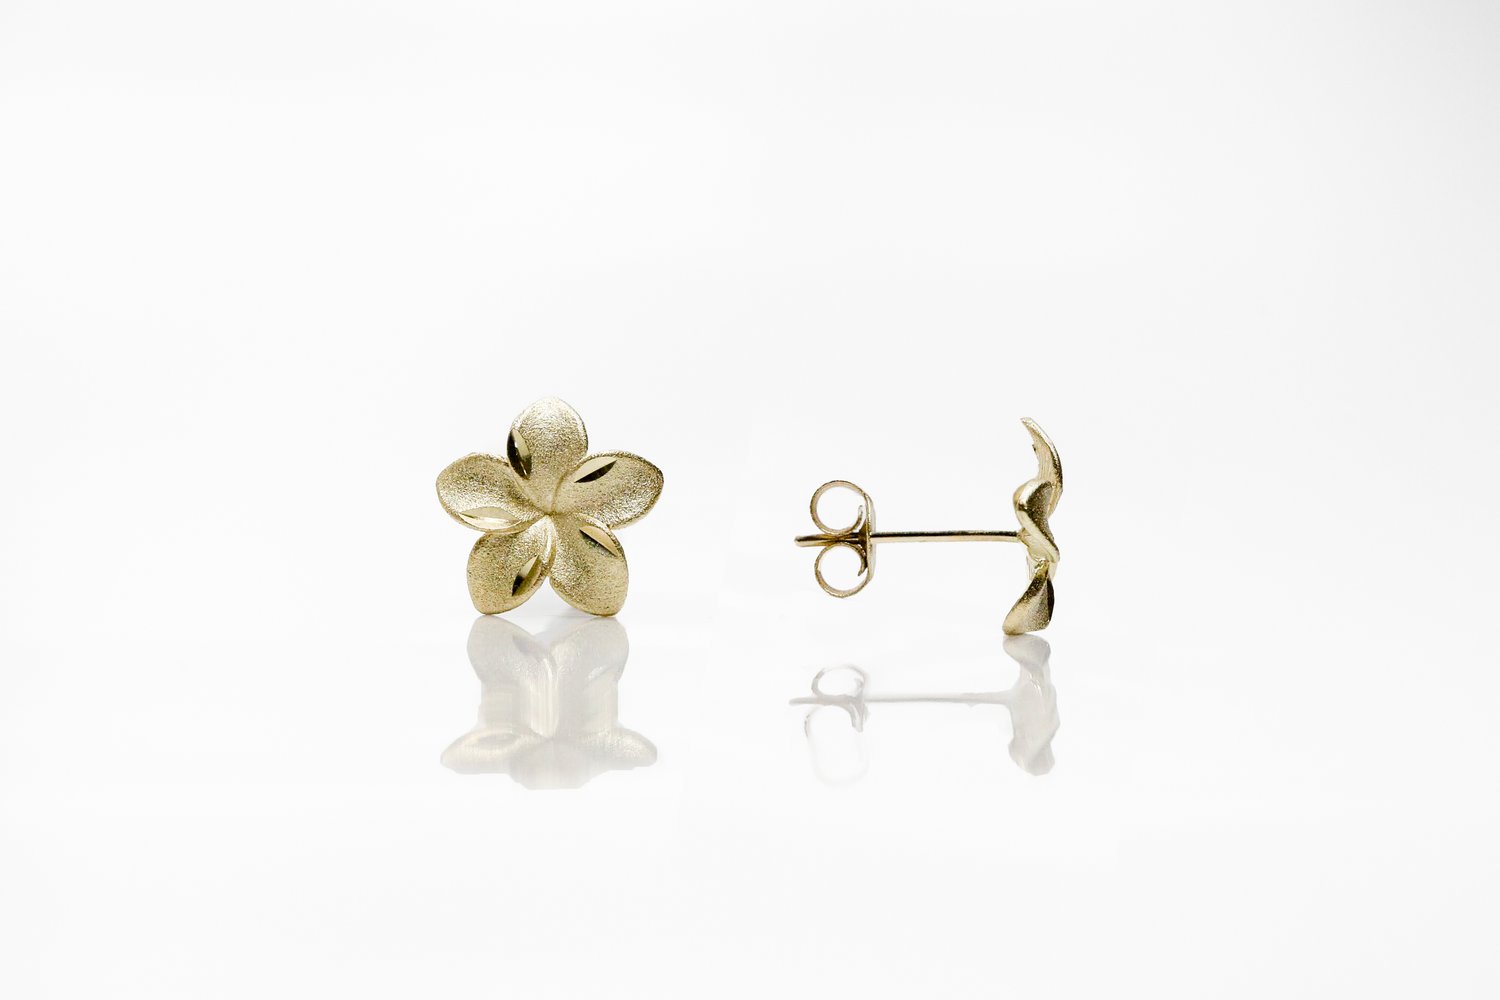 Plumeria Earrings - A Timeless Floral Jewelry Trend